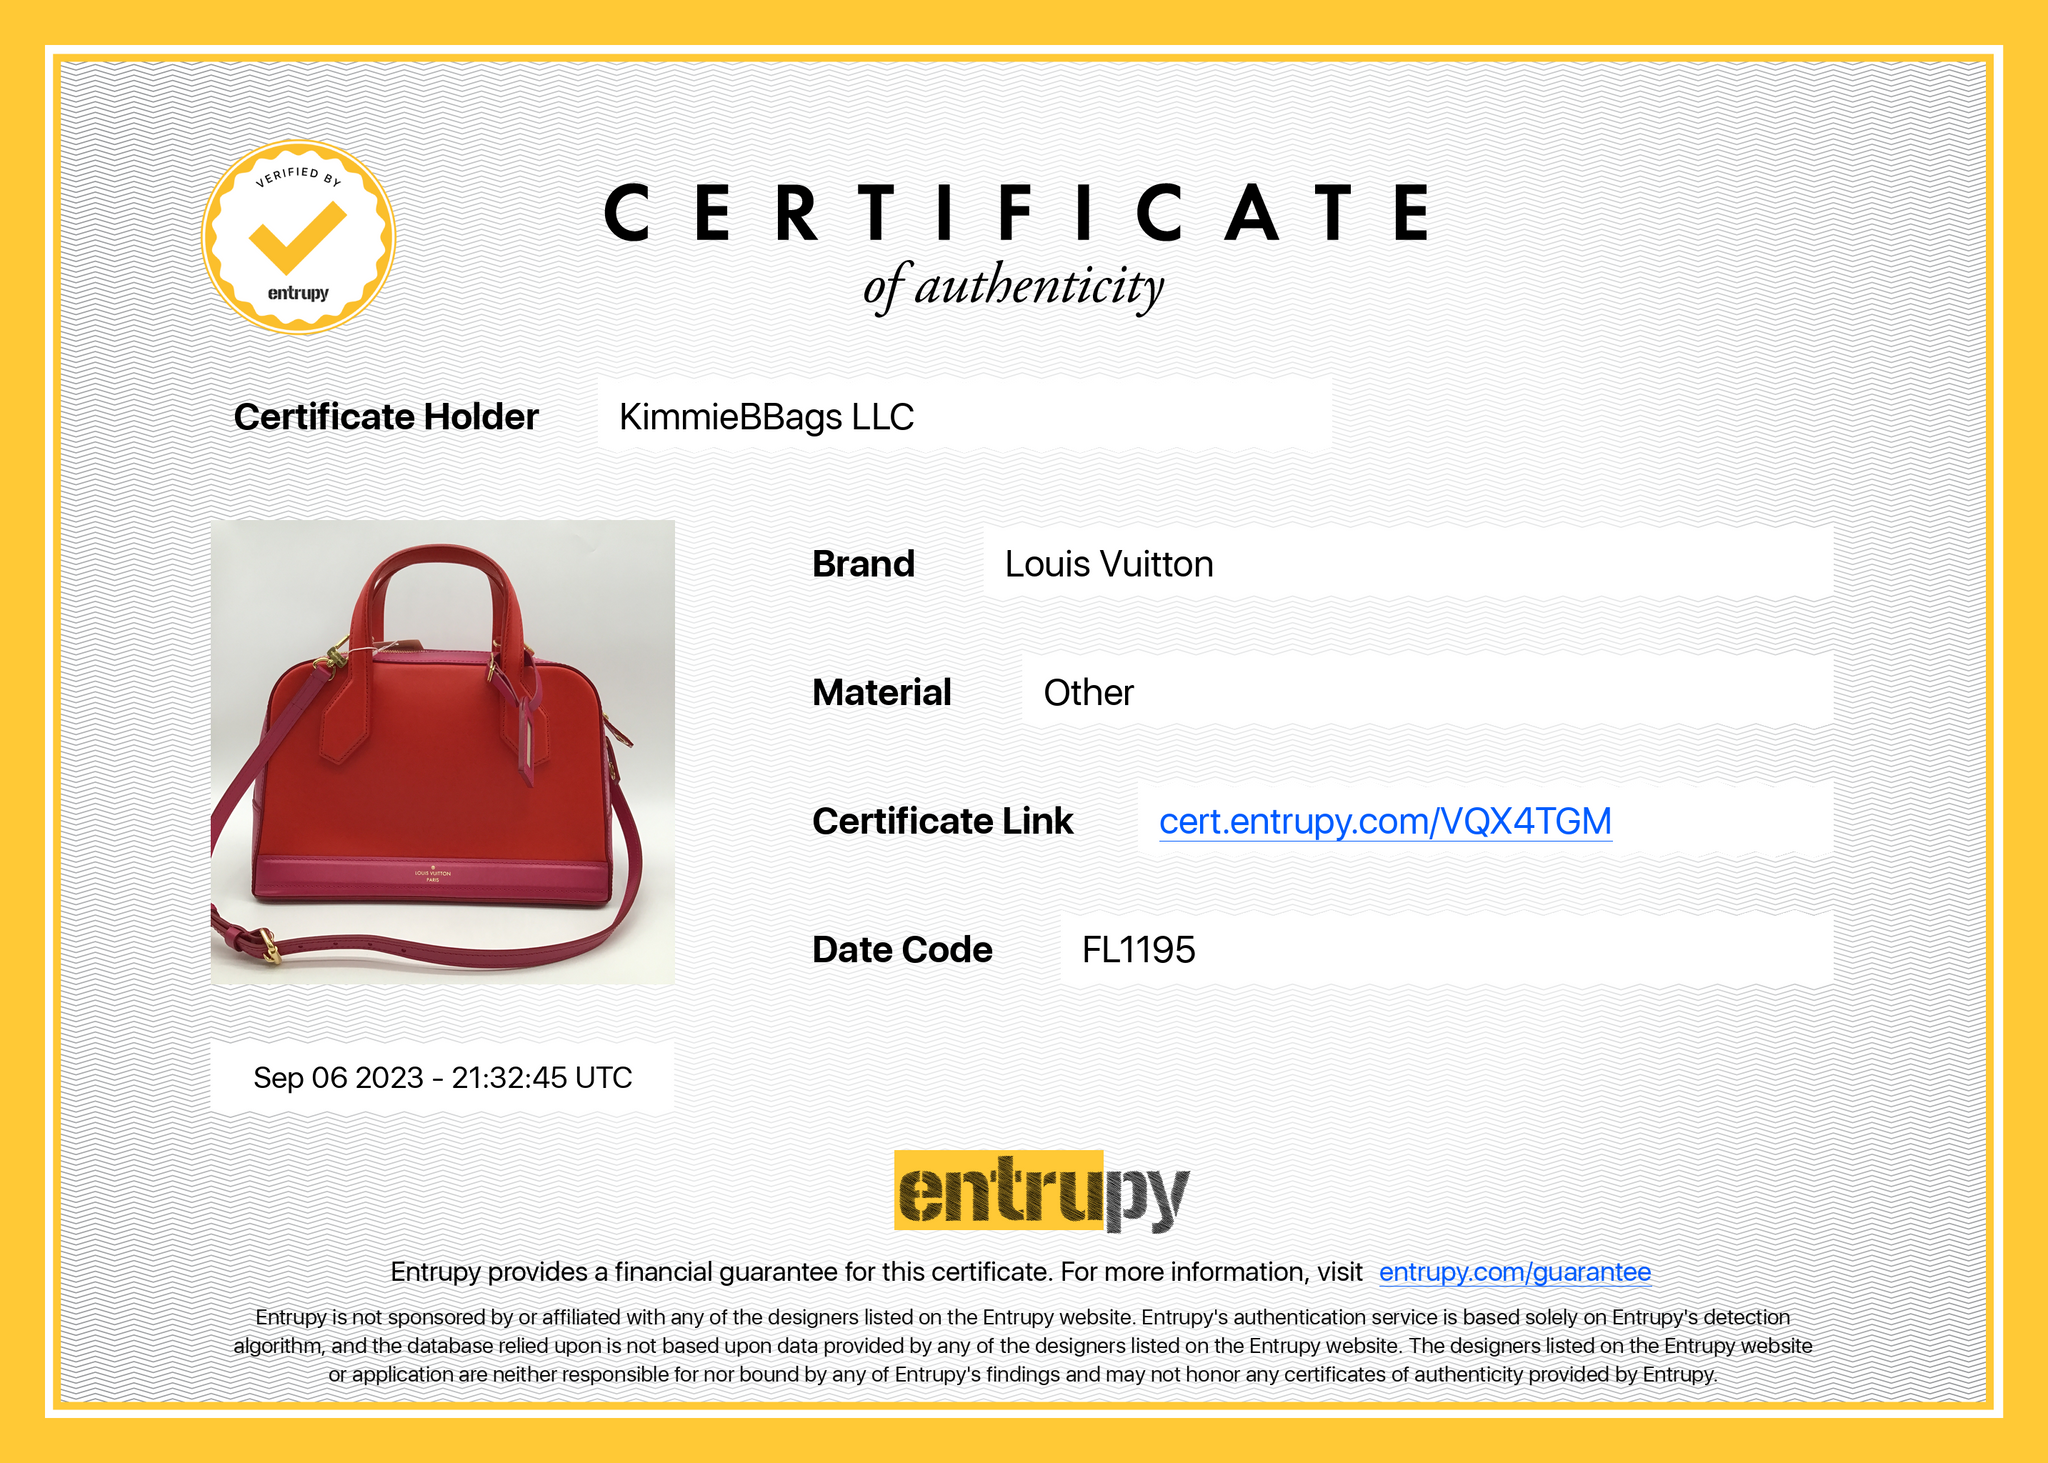 USED Louis Vuitton Red Epi Leather Alma PM Hand Bag AUTHENTIC